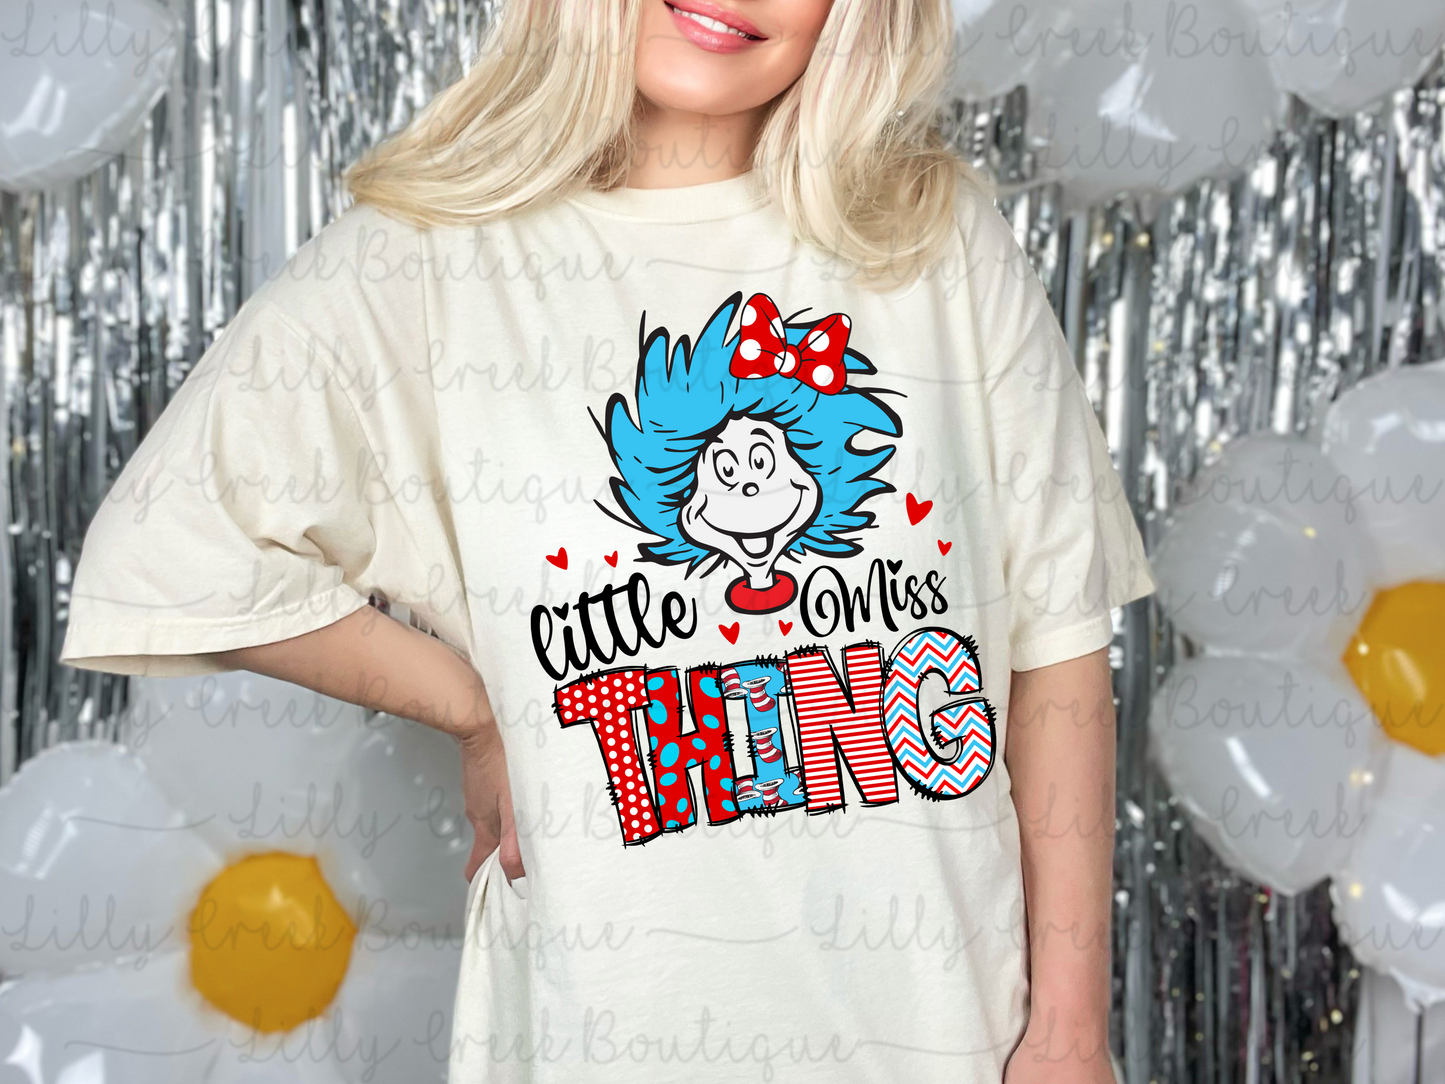 Little Miss Thing Tee